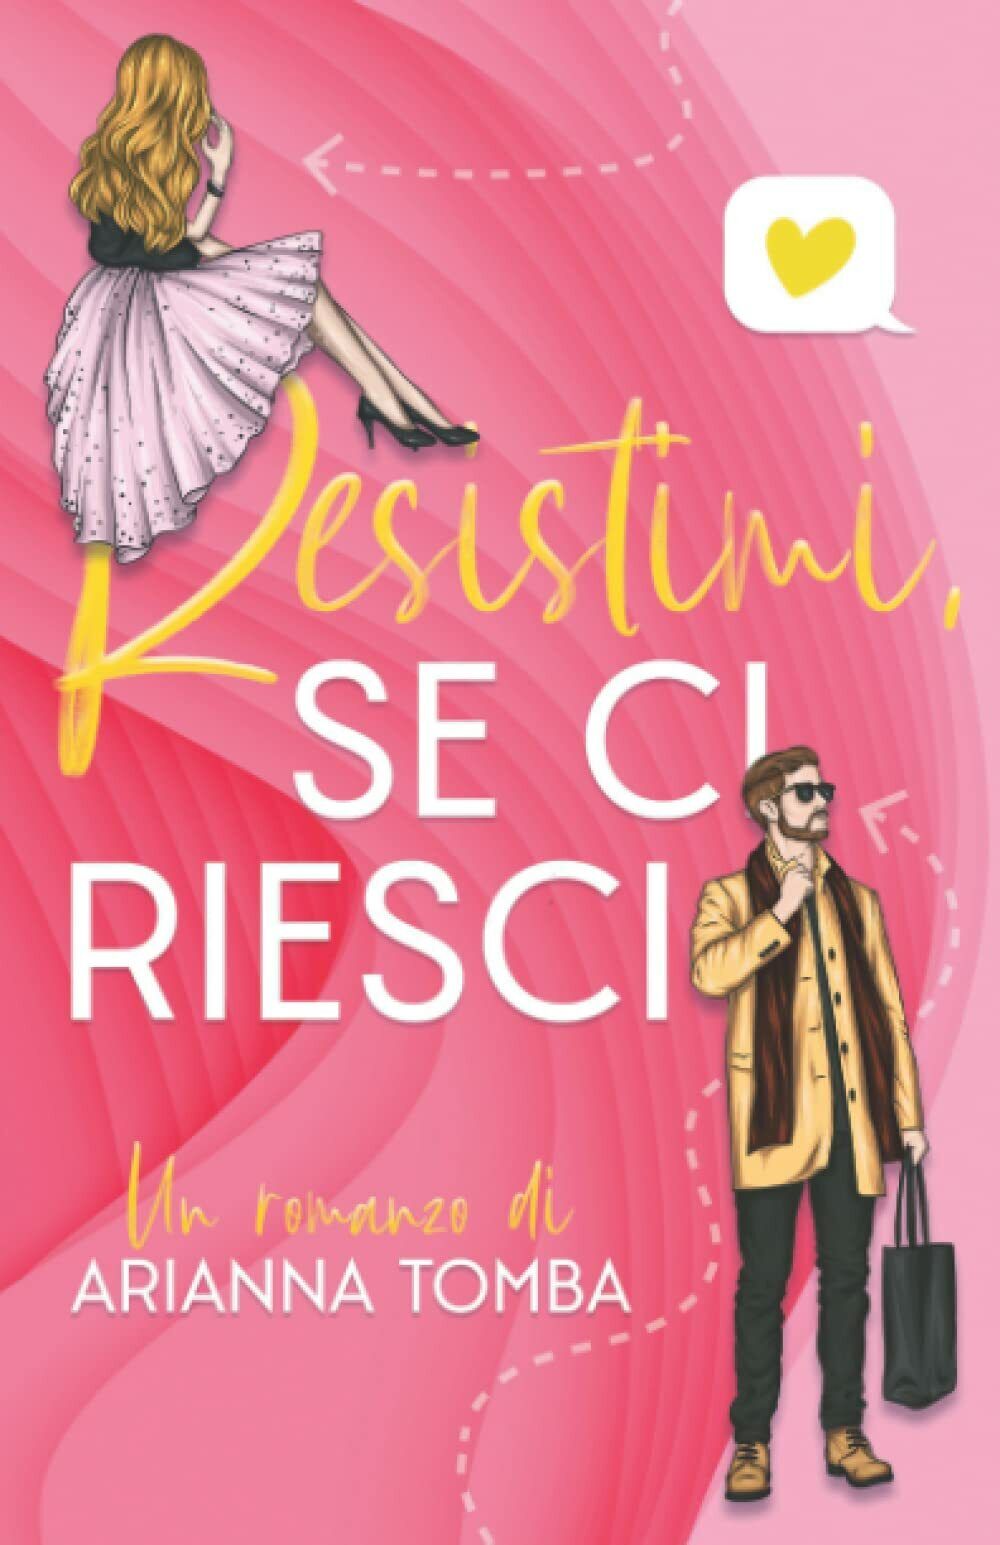 Resistimi, se ci riesci di Arianna Tomba,  2021,  Indipendently Published